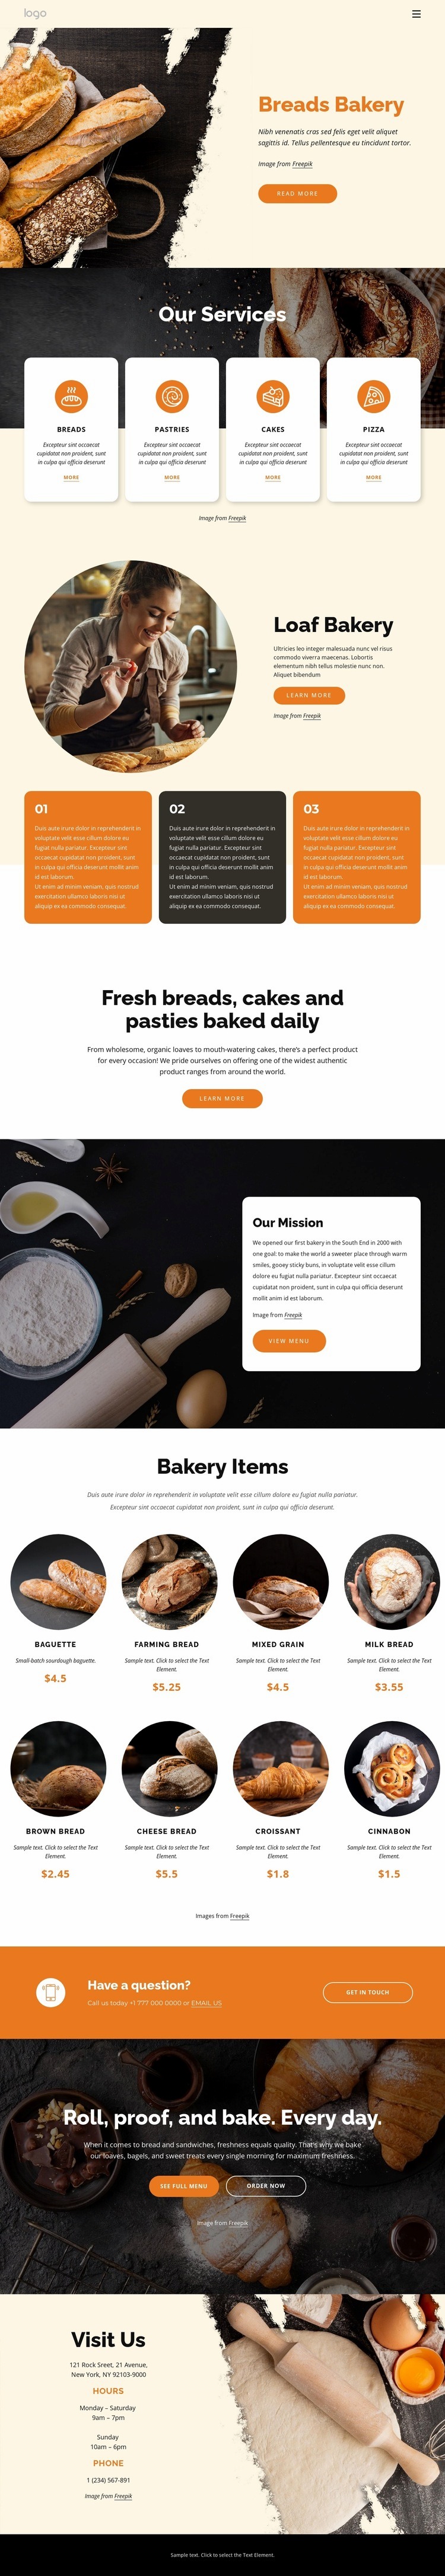 Breads bakery Web Page Design